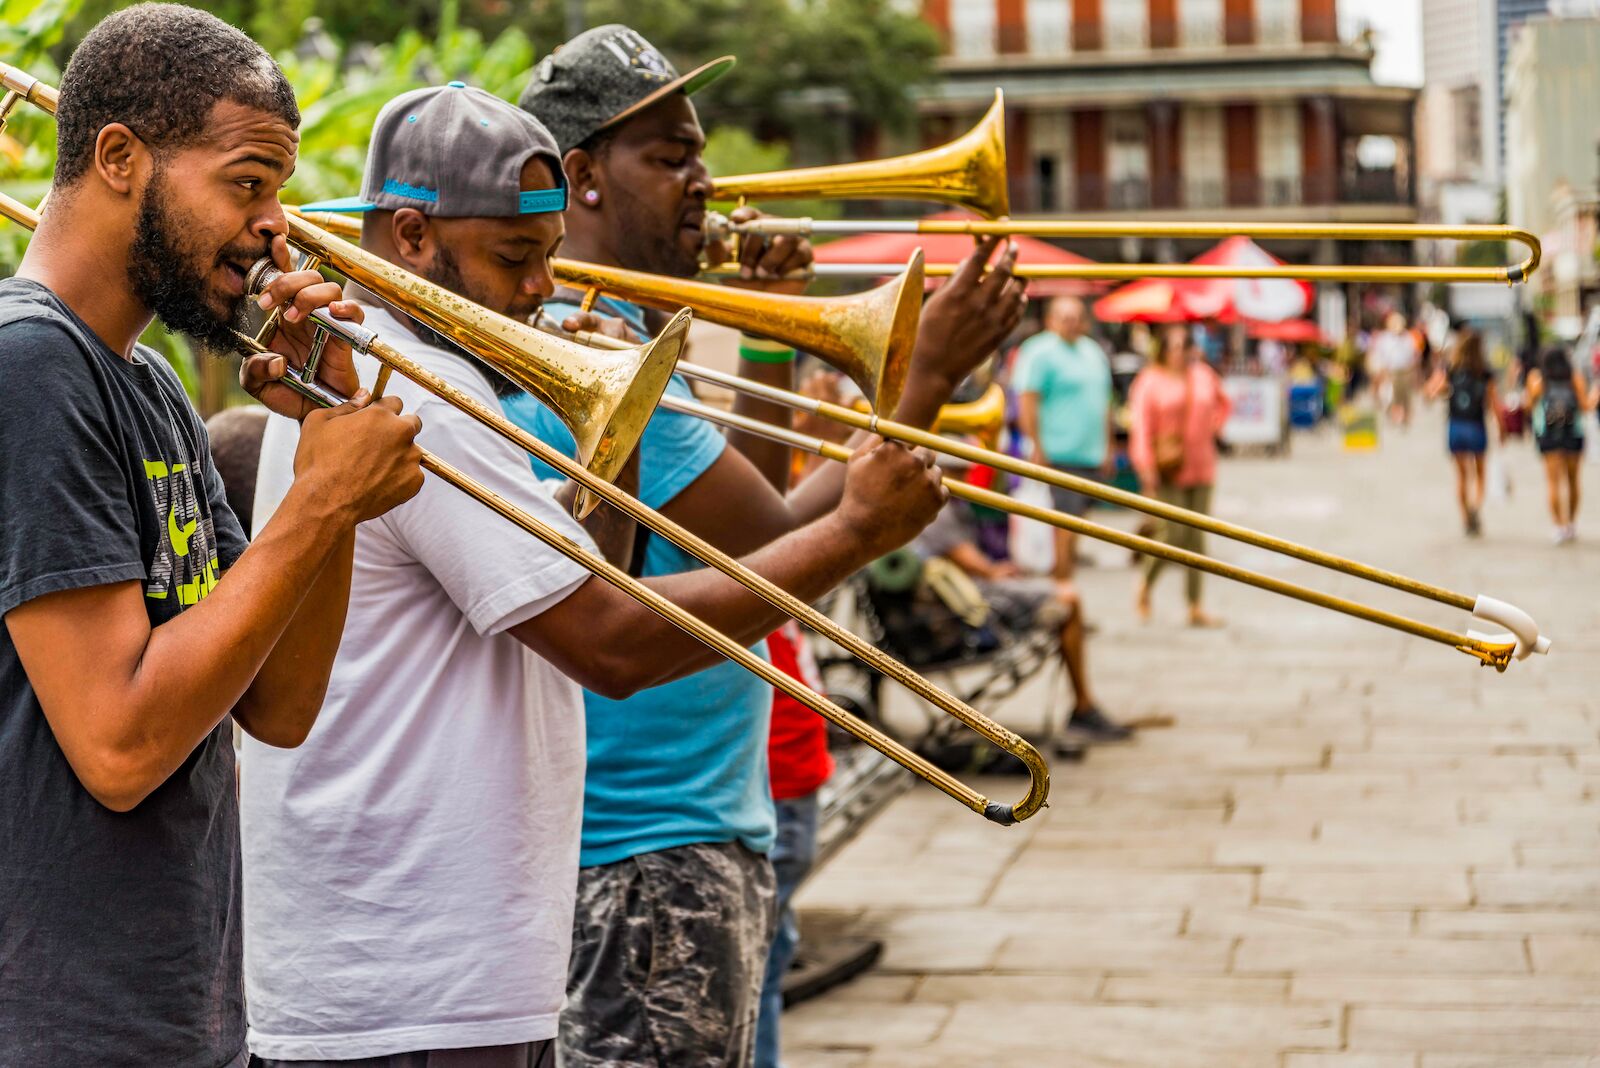 A group of street musician in downtown New Orleans, LA, USA